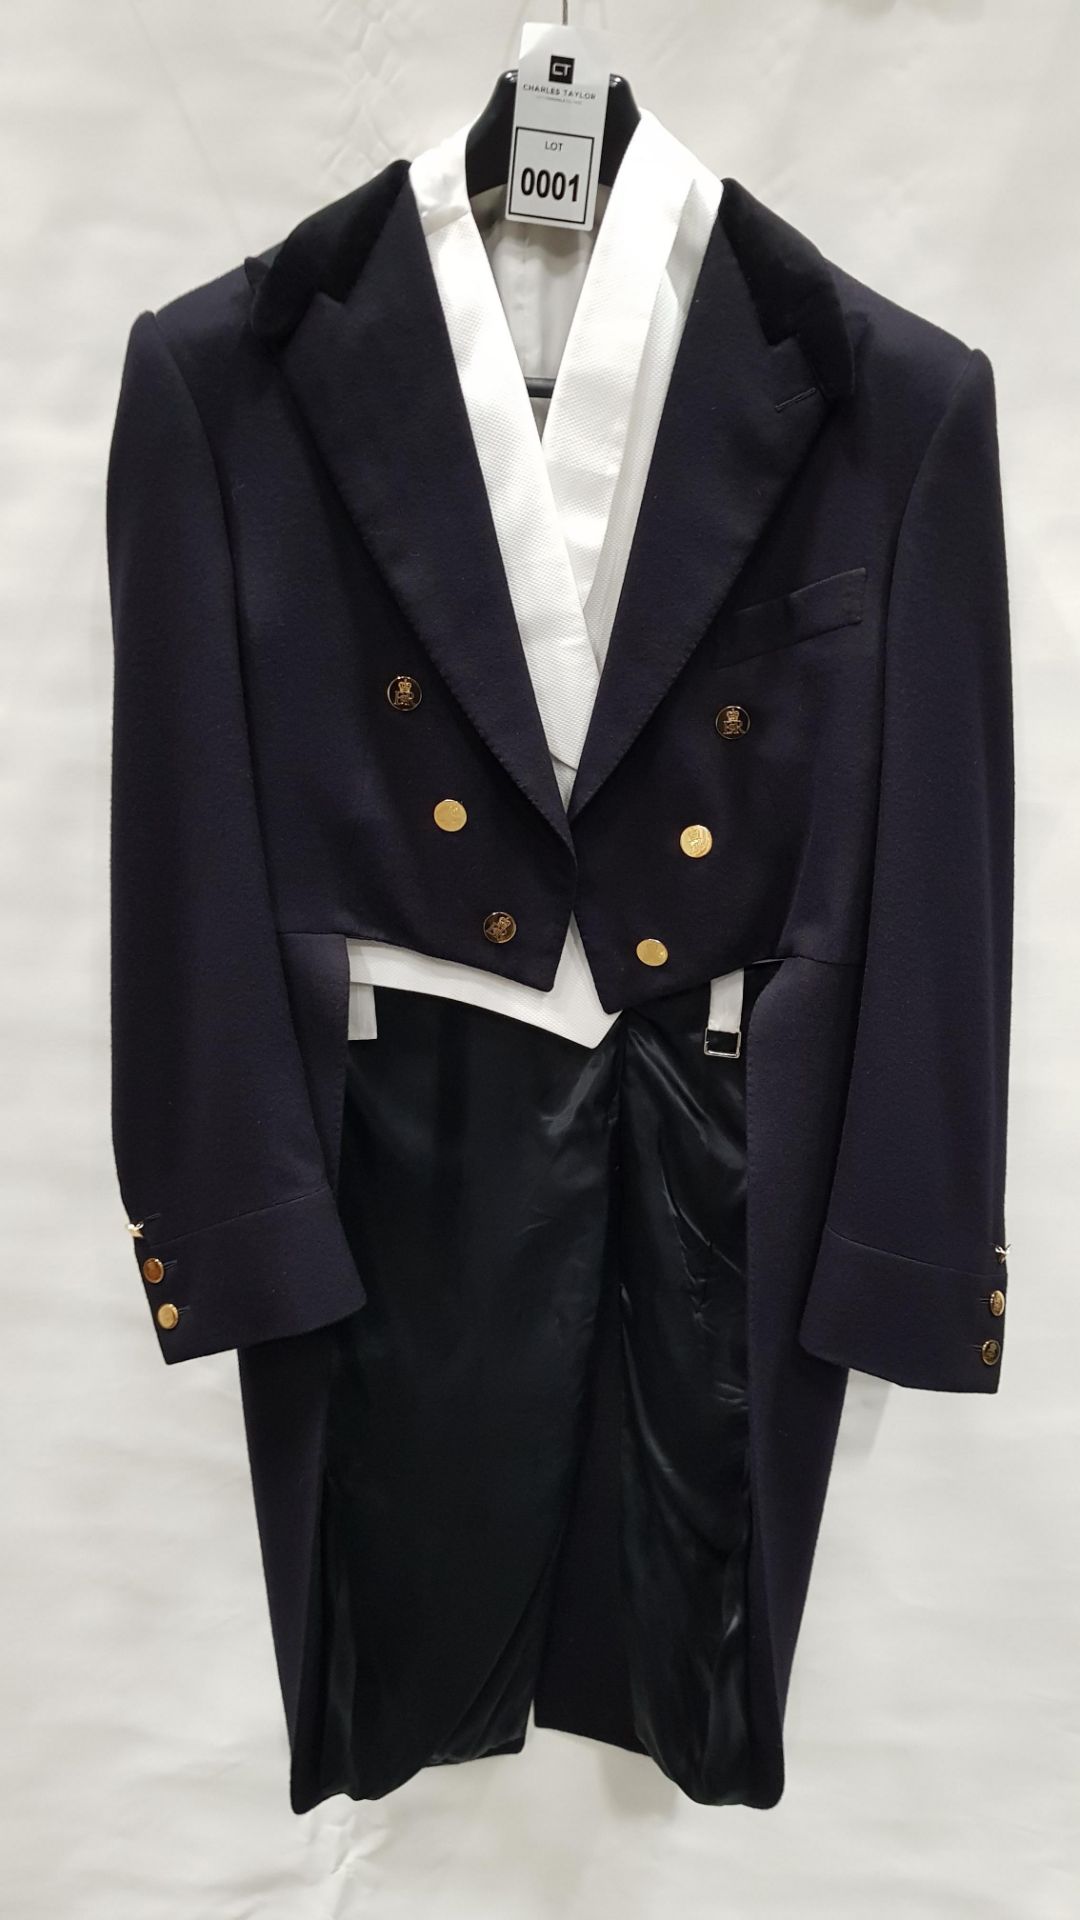 BRAND NEW LUTWYCHE BLACK WOOLEN TAILCOAT WITH ER BUTTONS & VELVET COLLAR COMPLETE WITH A GIEVES &